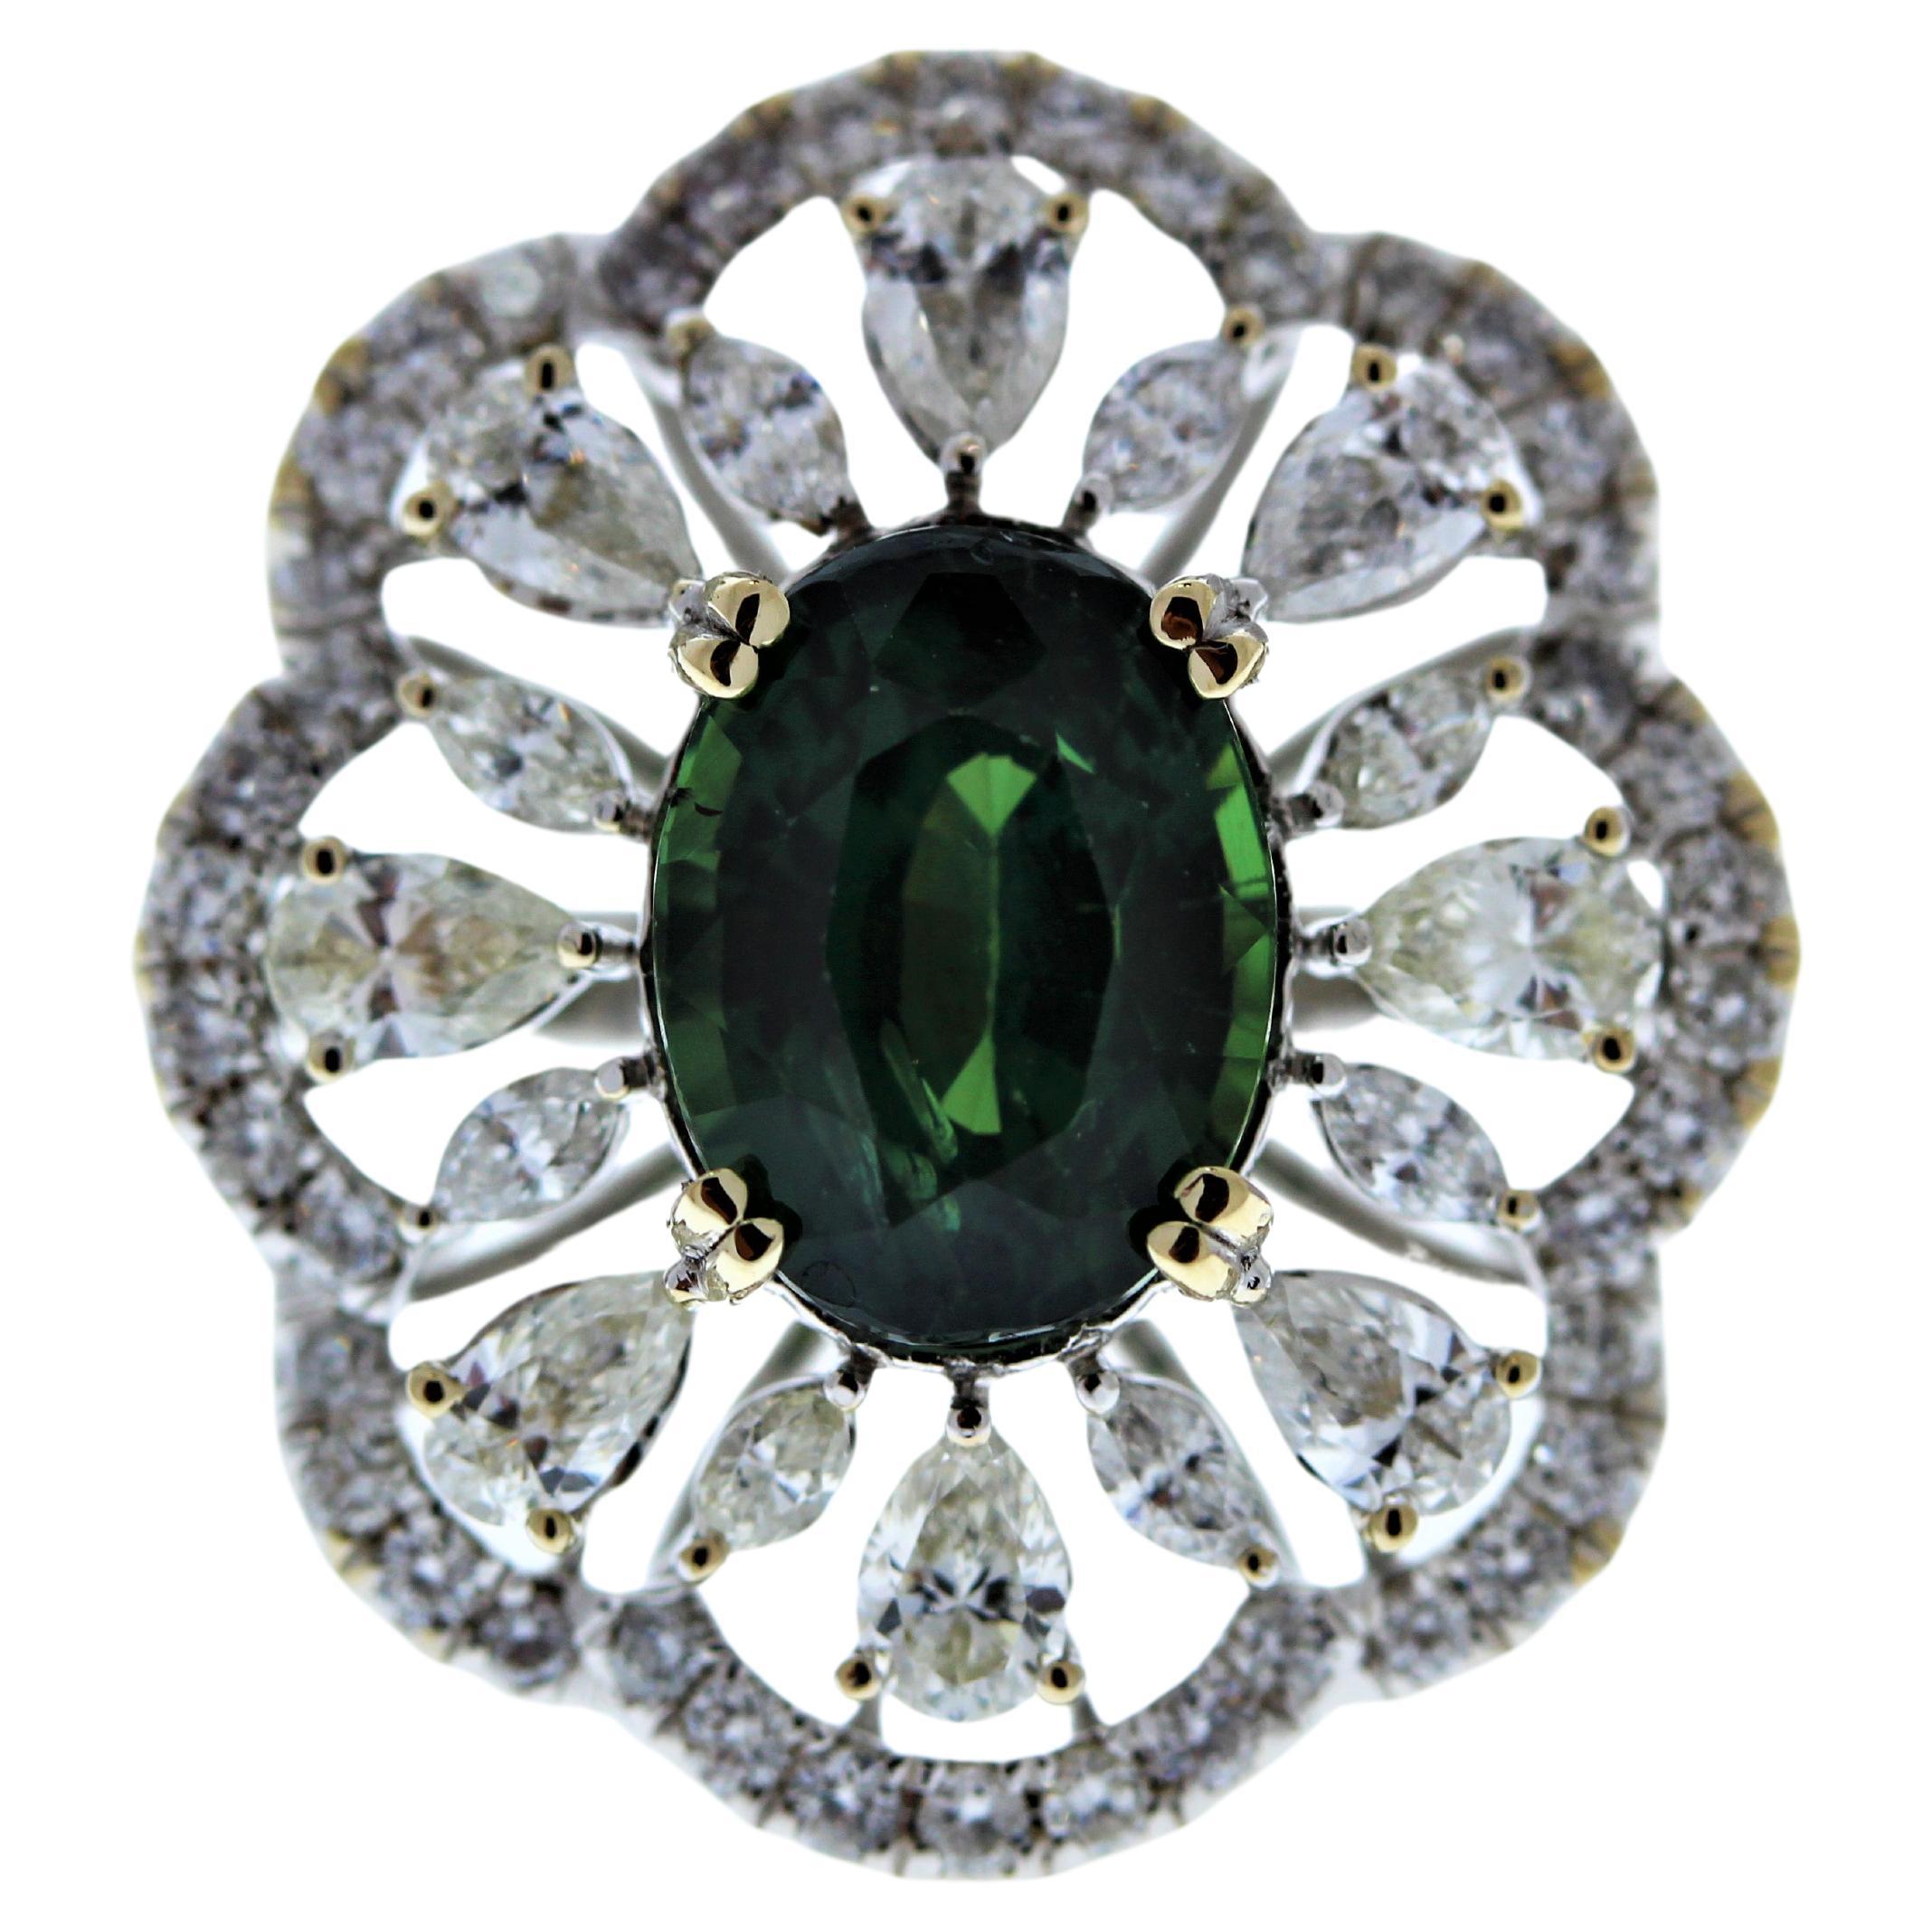 6.01ct Green Sapphire and 2.09ctw Diamond Ring in 14K White Gold